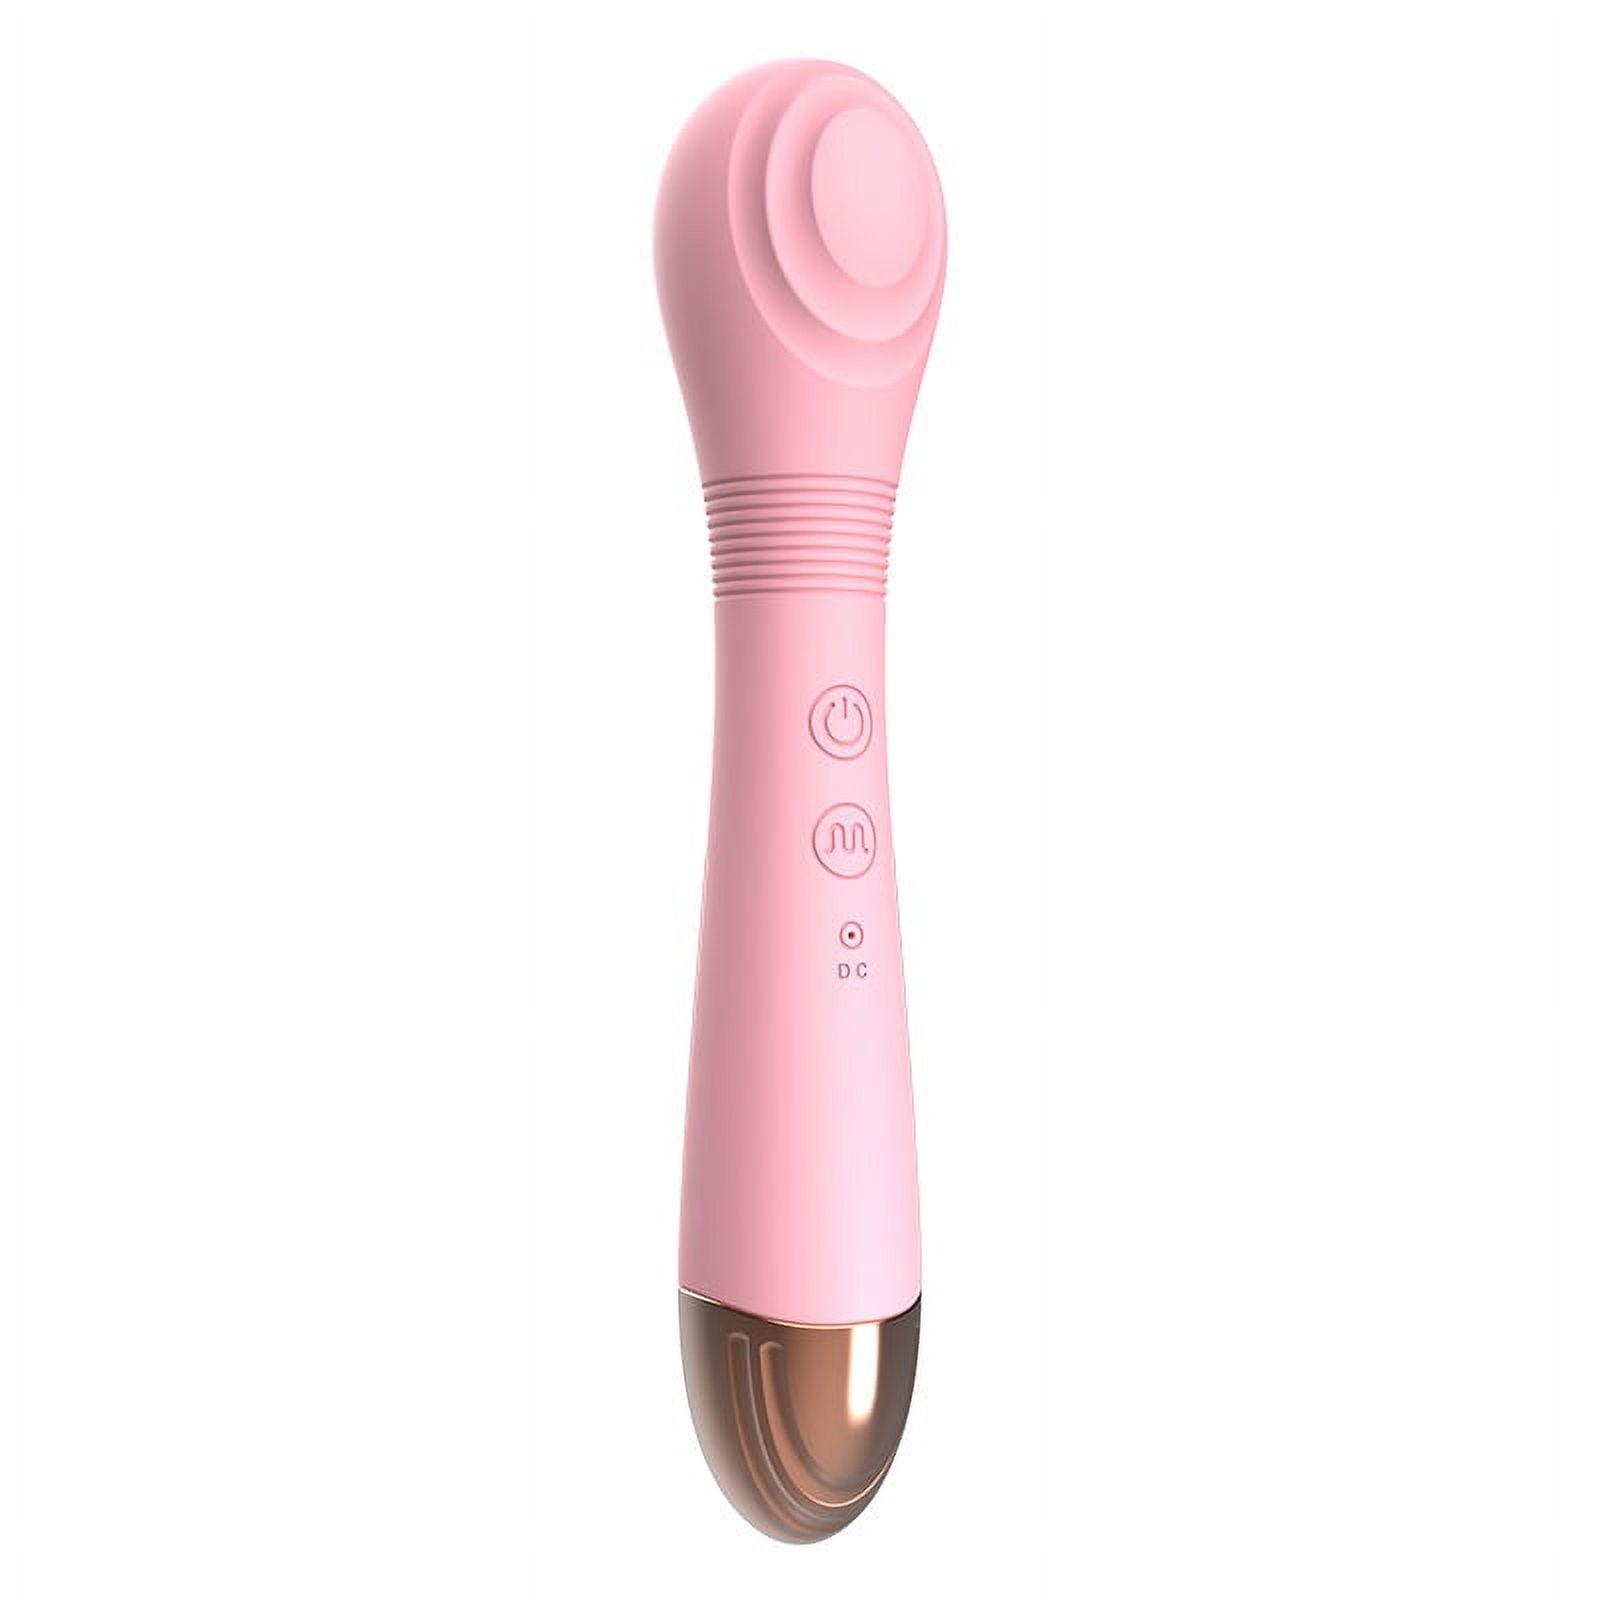 ashley mergy recommends How To Masturbate With A Massager